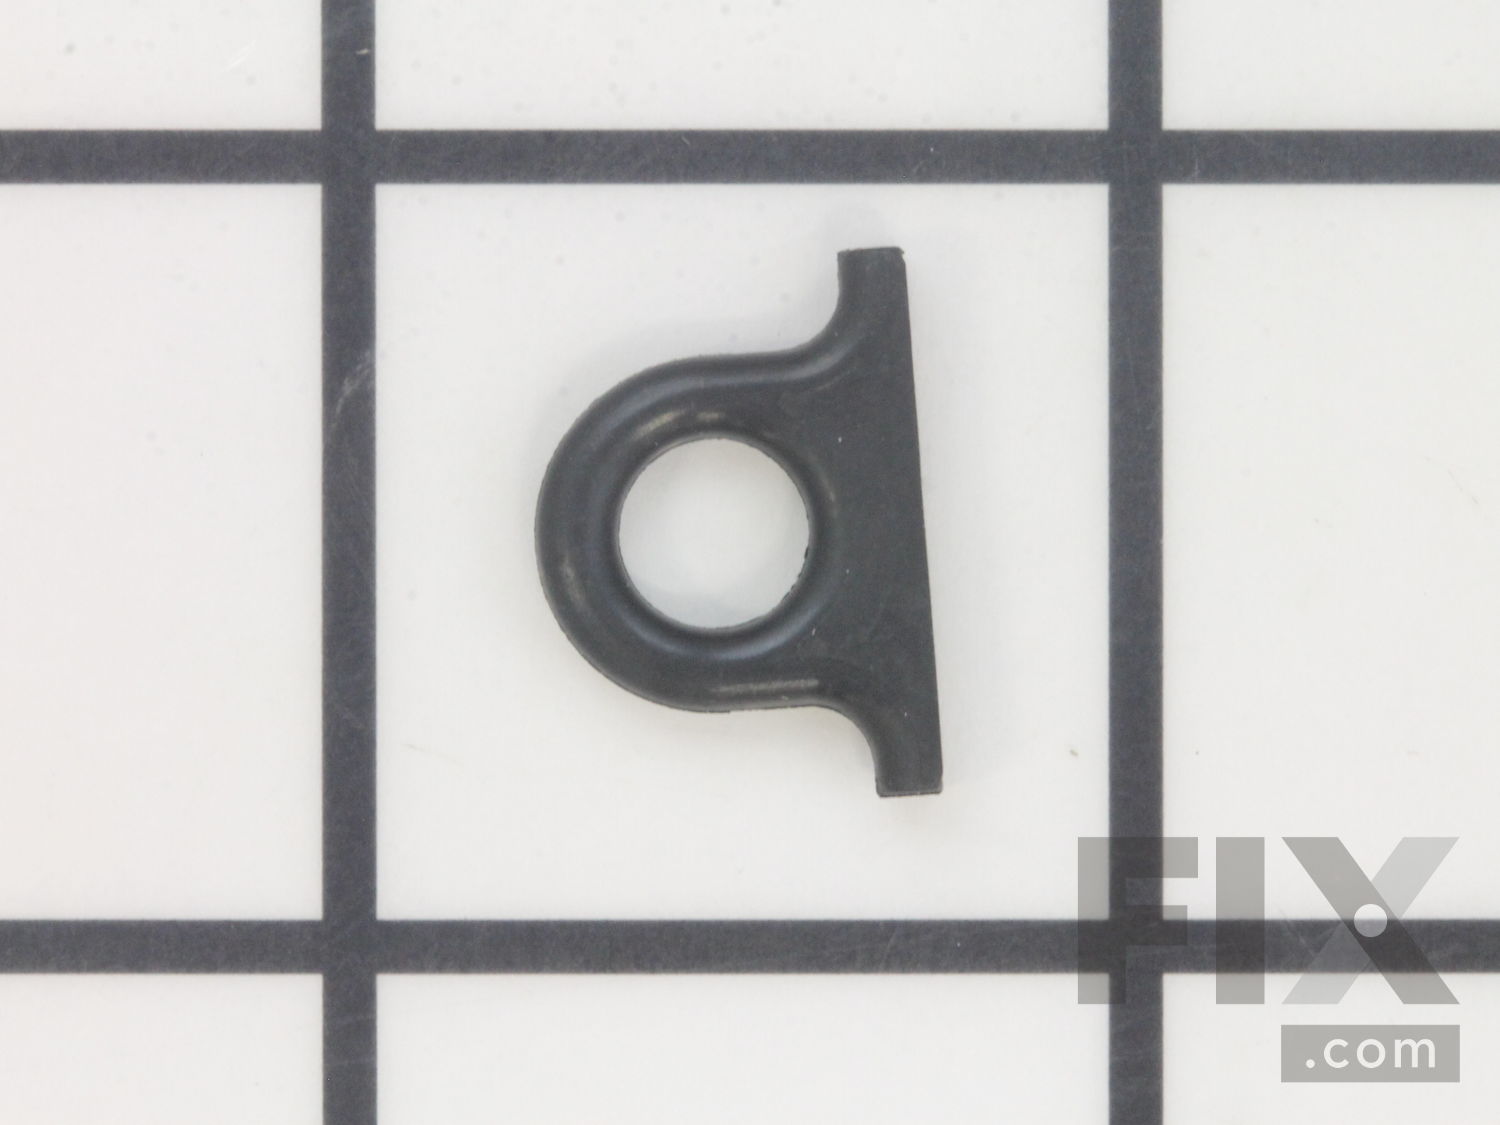 Details about   Air Compressor Sealing Gasket Accessories Fit For Porter Cable Industrial Supply 